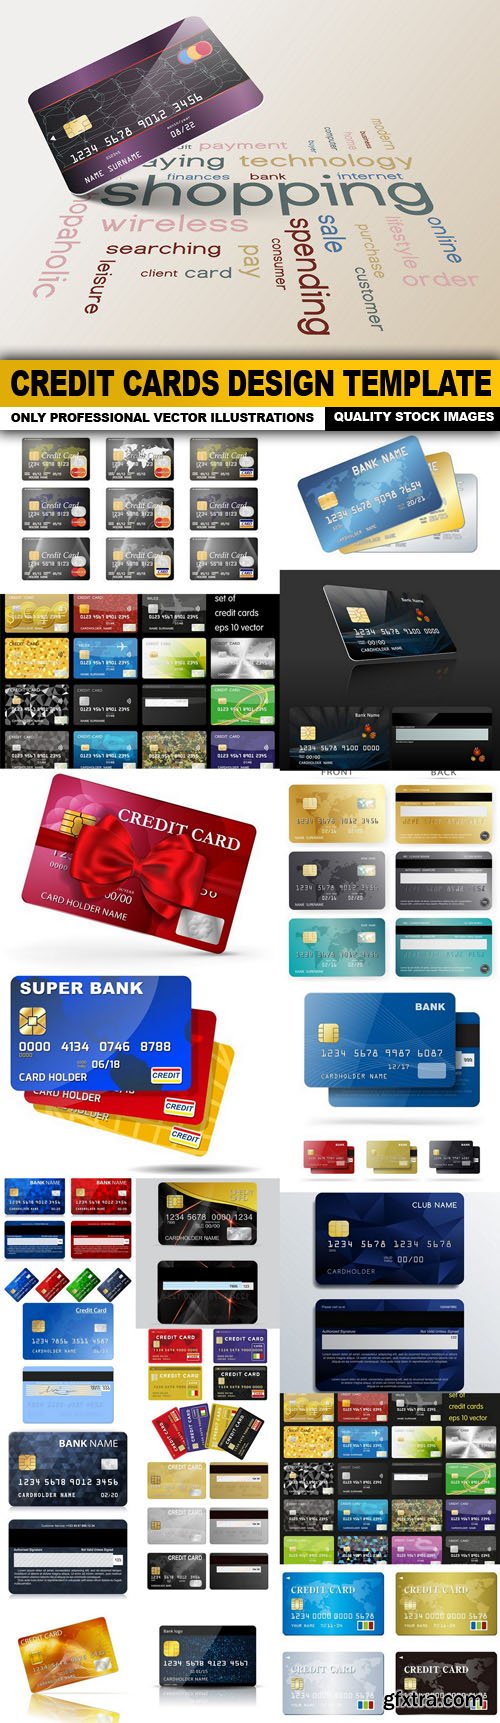 Credit Cards Design Template - 20 Vector